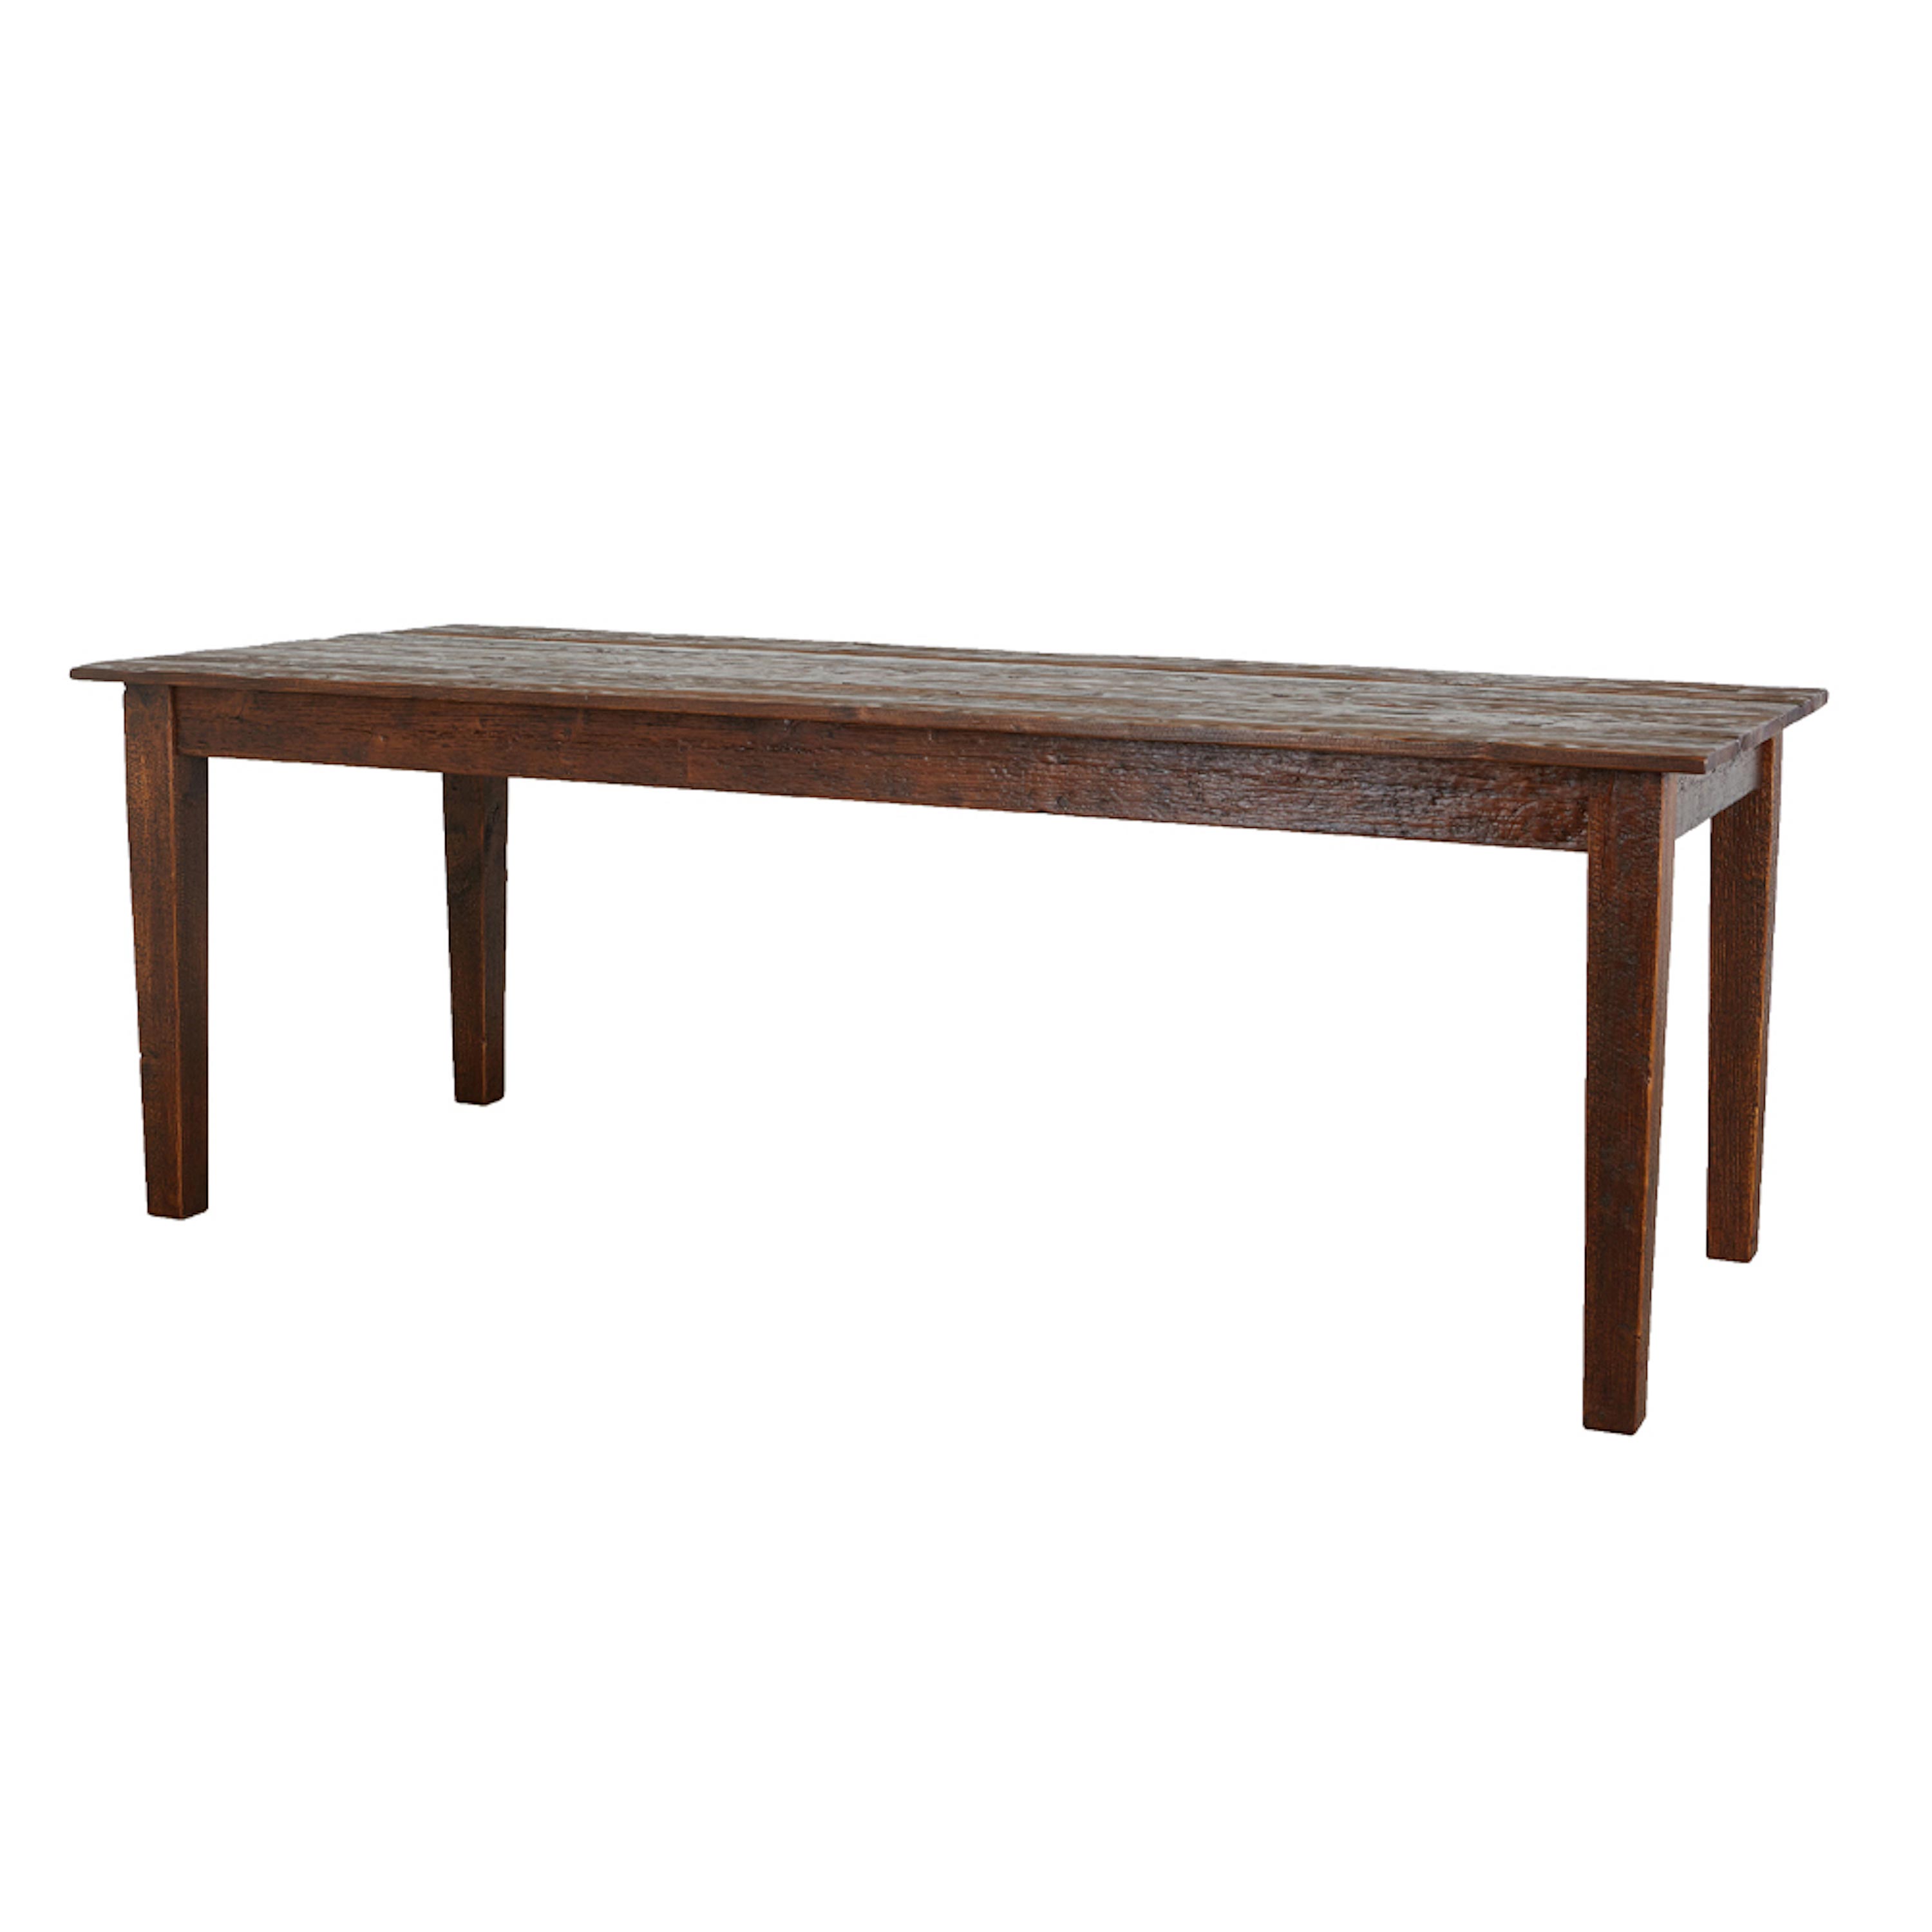 Reclaimed Wood Provence Farm Table, 7ft swatch image